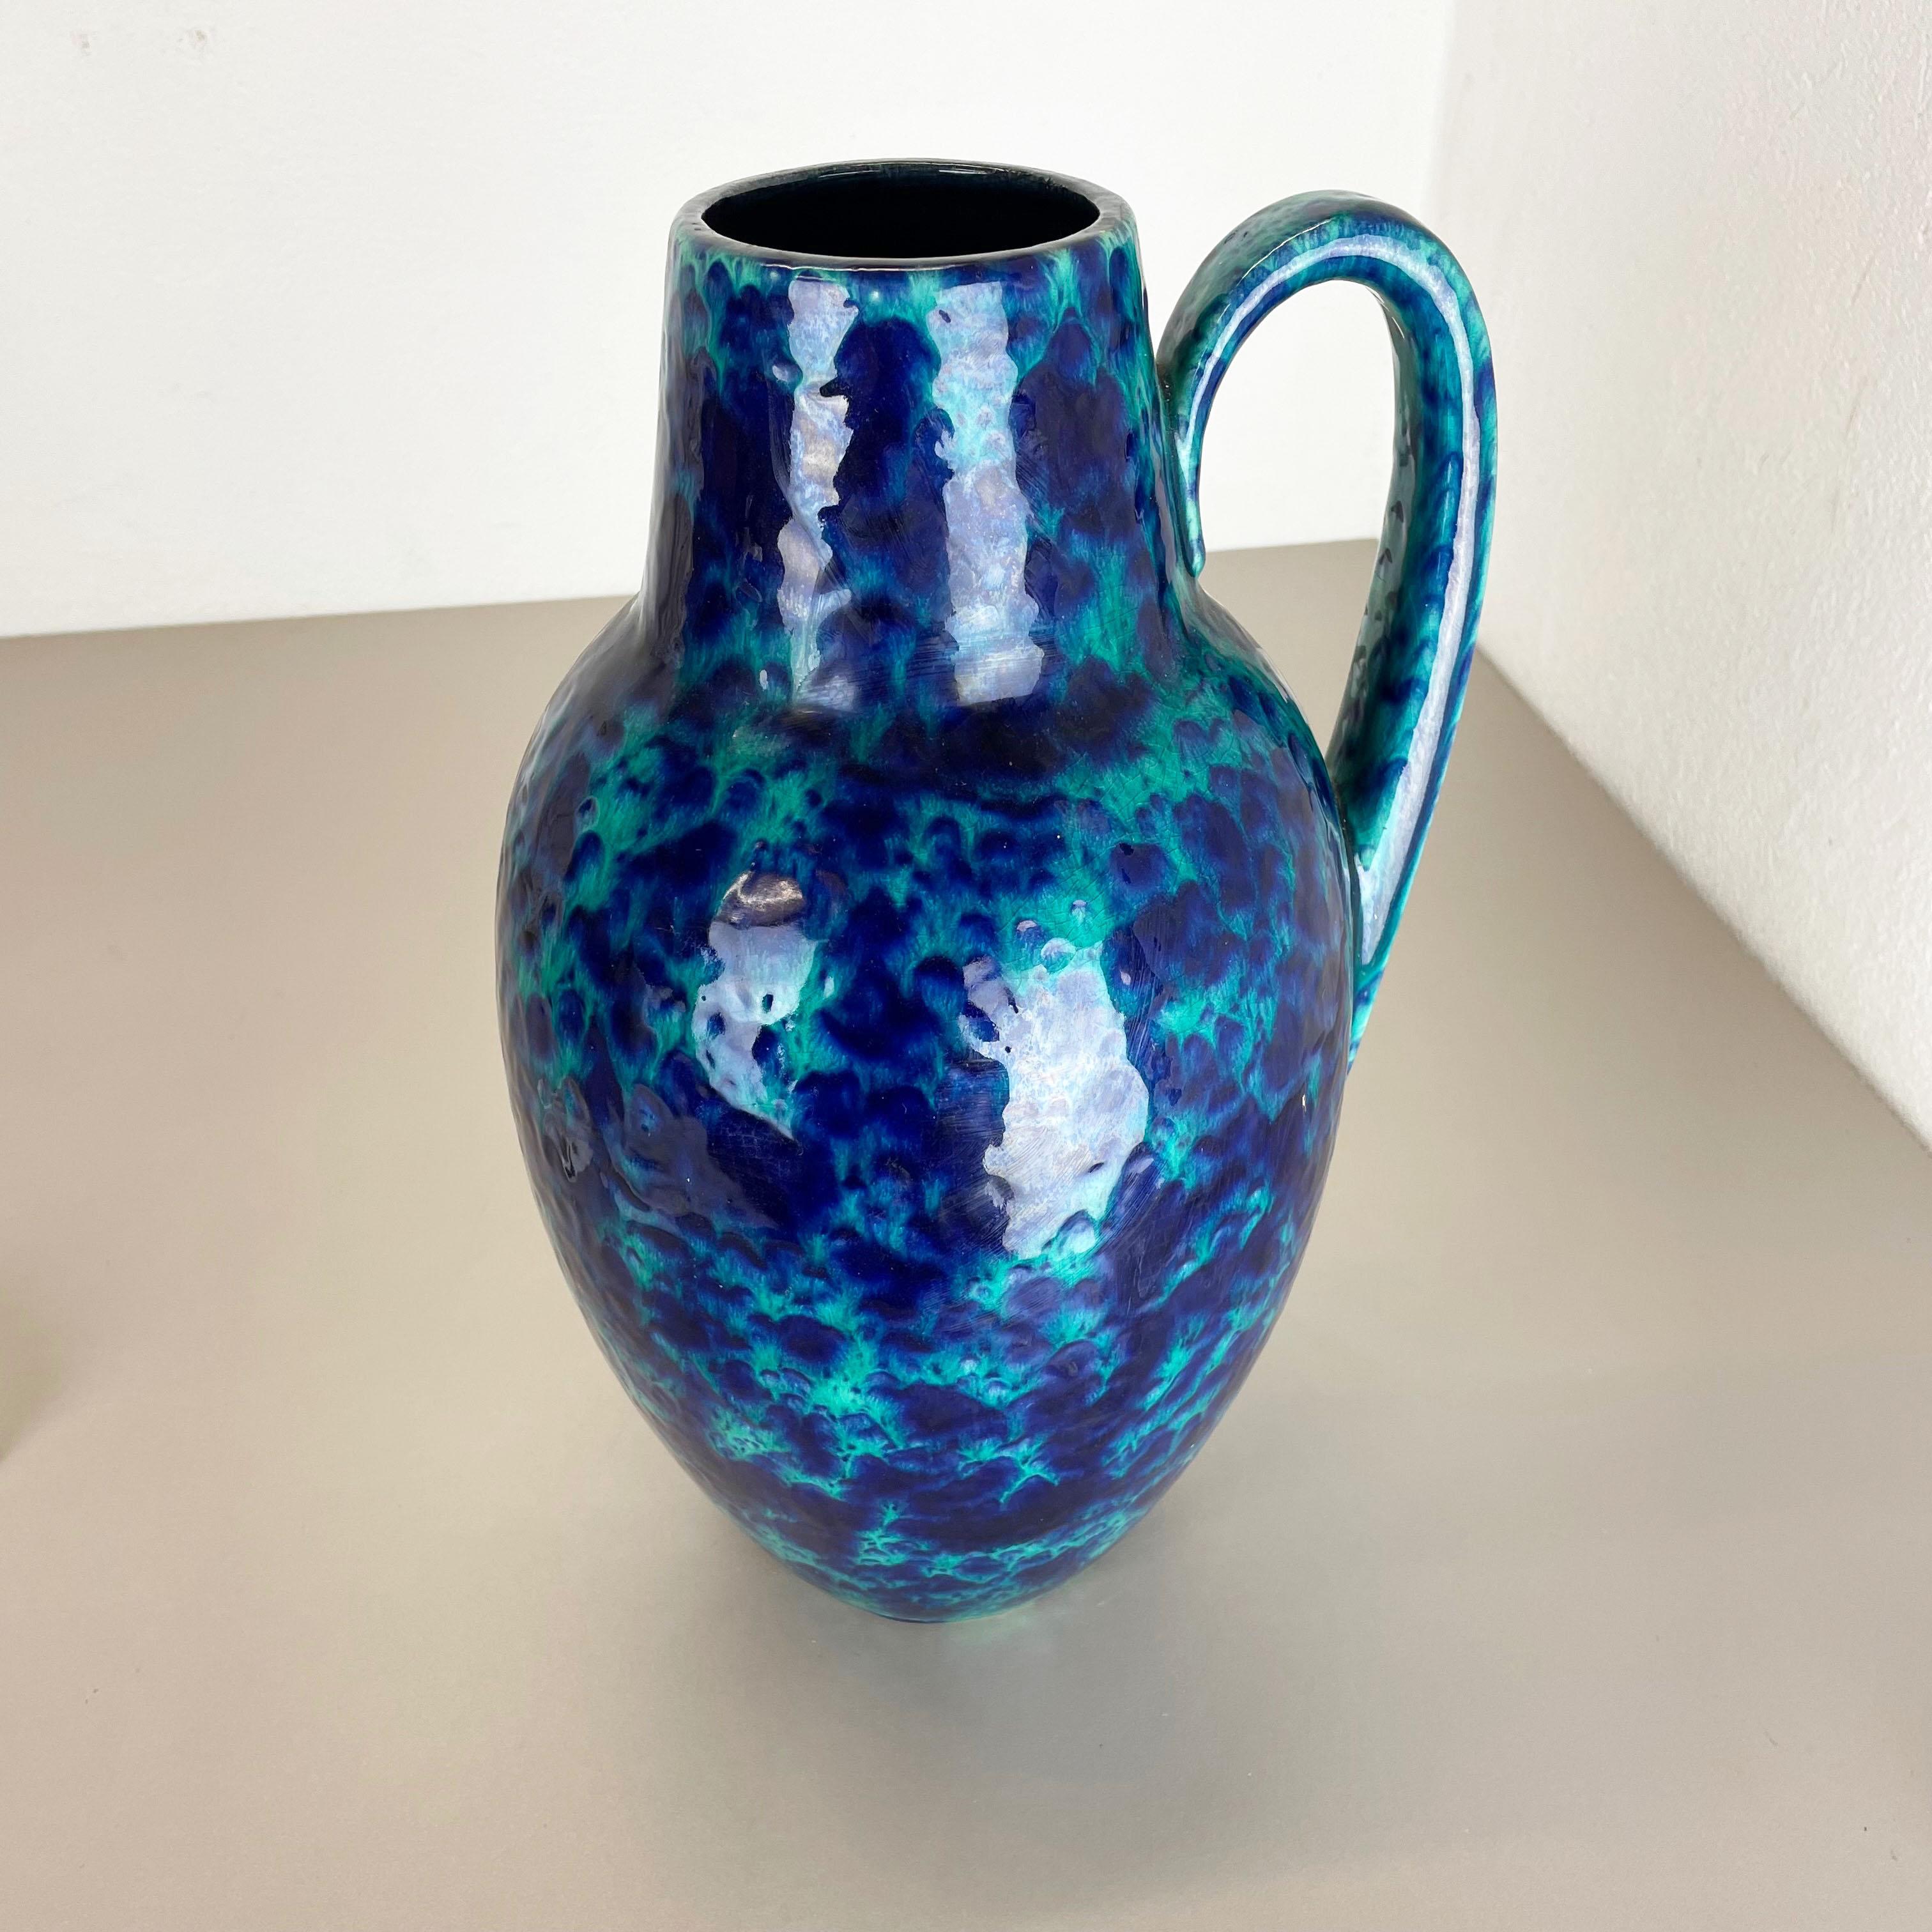 Article:

Fat lava art vase extra large version


Producer:

Scheurich, Germany



Decade:

1970s


Description:

This original vintage vase was produced in the 1970s in Germany. It is made of ceramic pottery in fat lava optic with